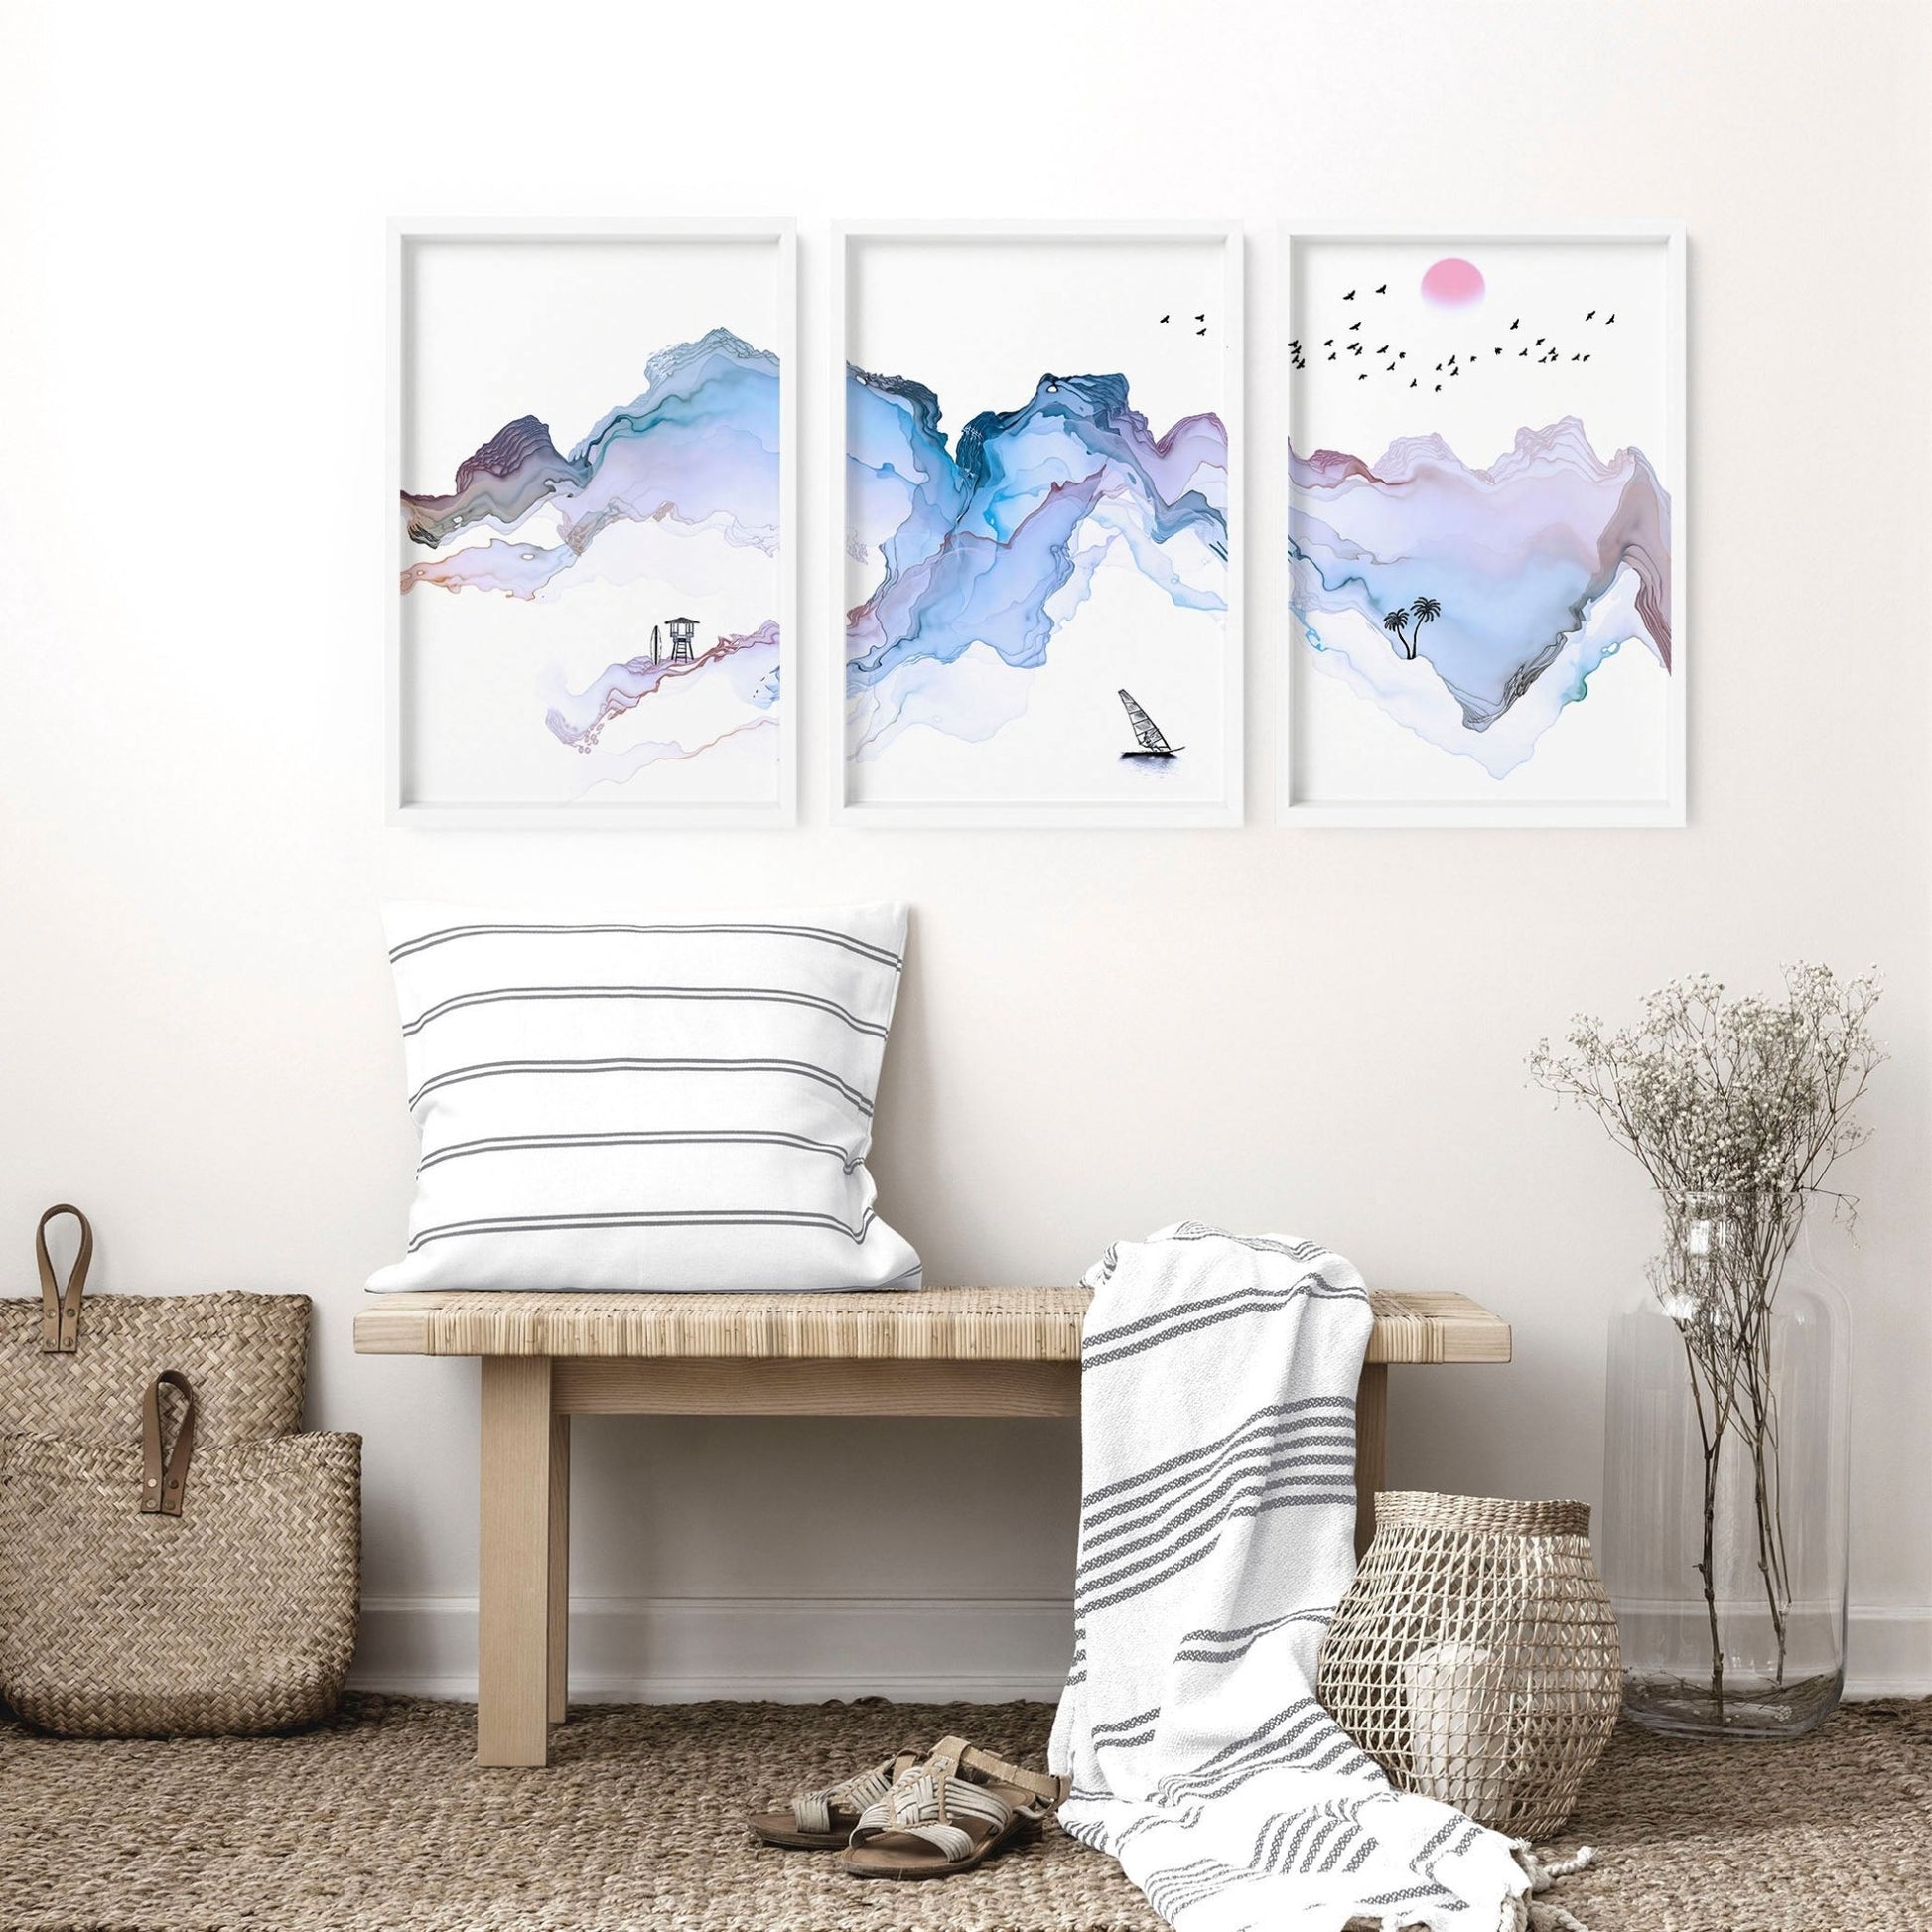 Coast art - Set of 3 wall picture prints - About Wall Art